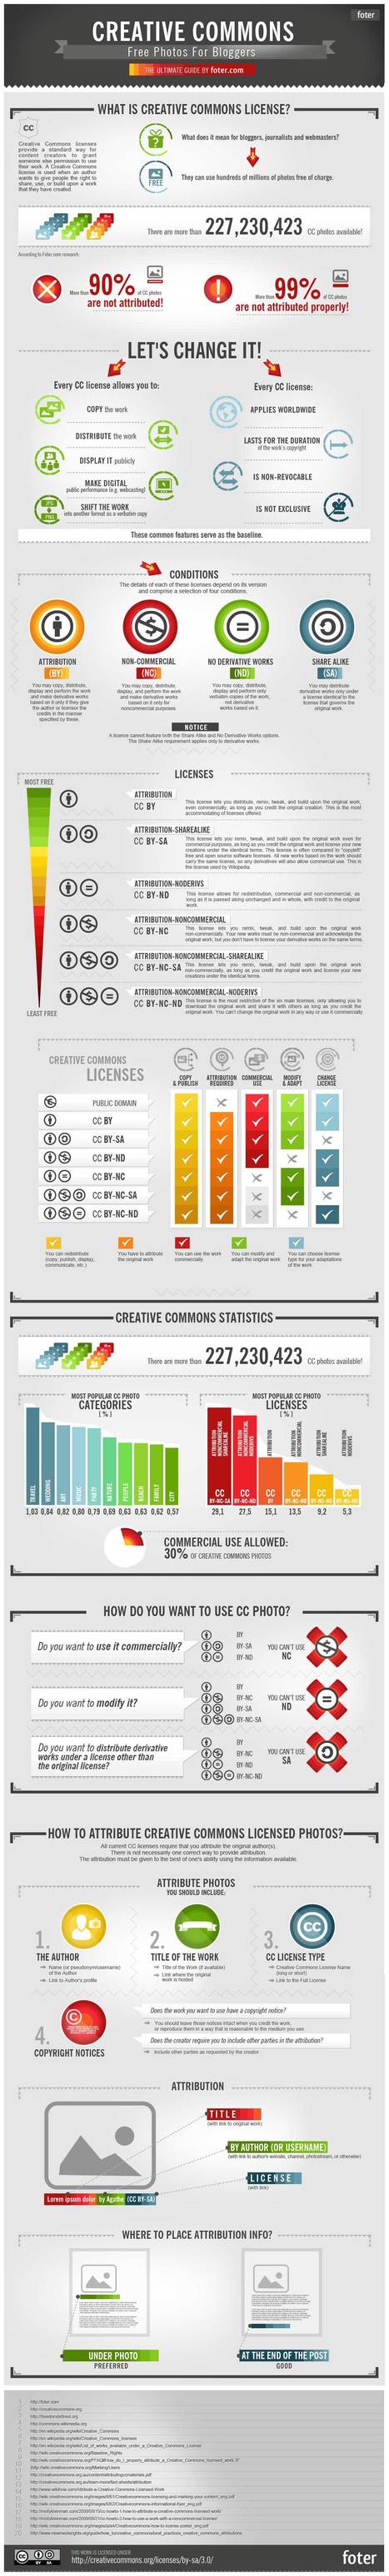 CreativeCommons-Infographic | Moodle and Web 2.0 | Scoop.it